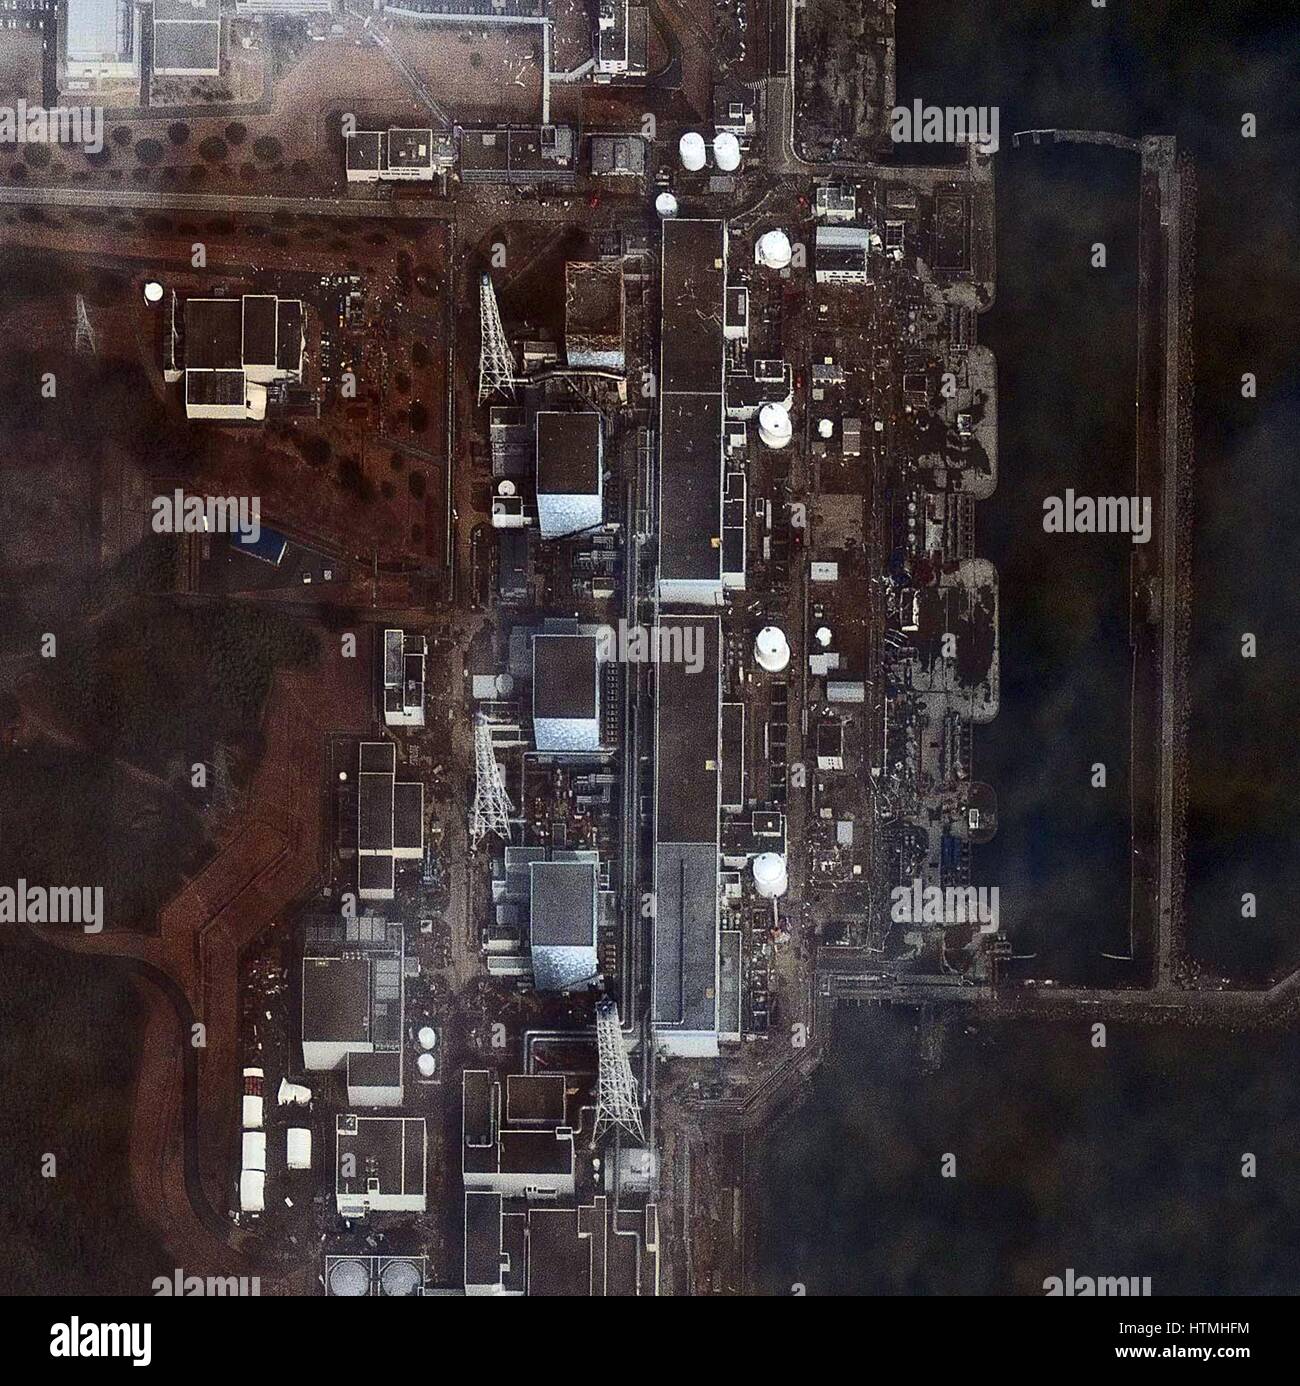 Fukushima Daiichi reactor in North eastern Japan 2011 Satellite view of earthquake damage to the reactors march15th 2011 Stock Photo